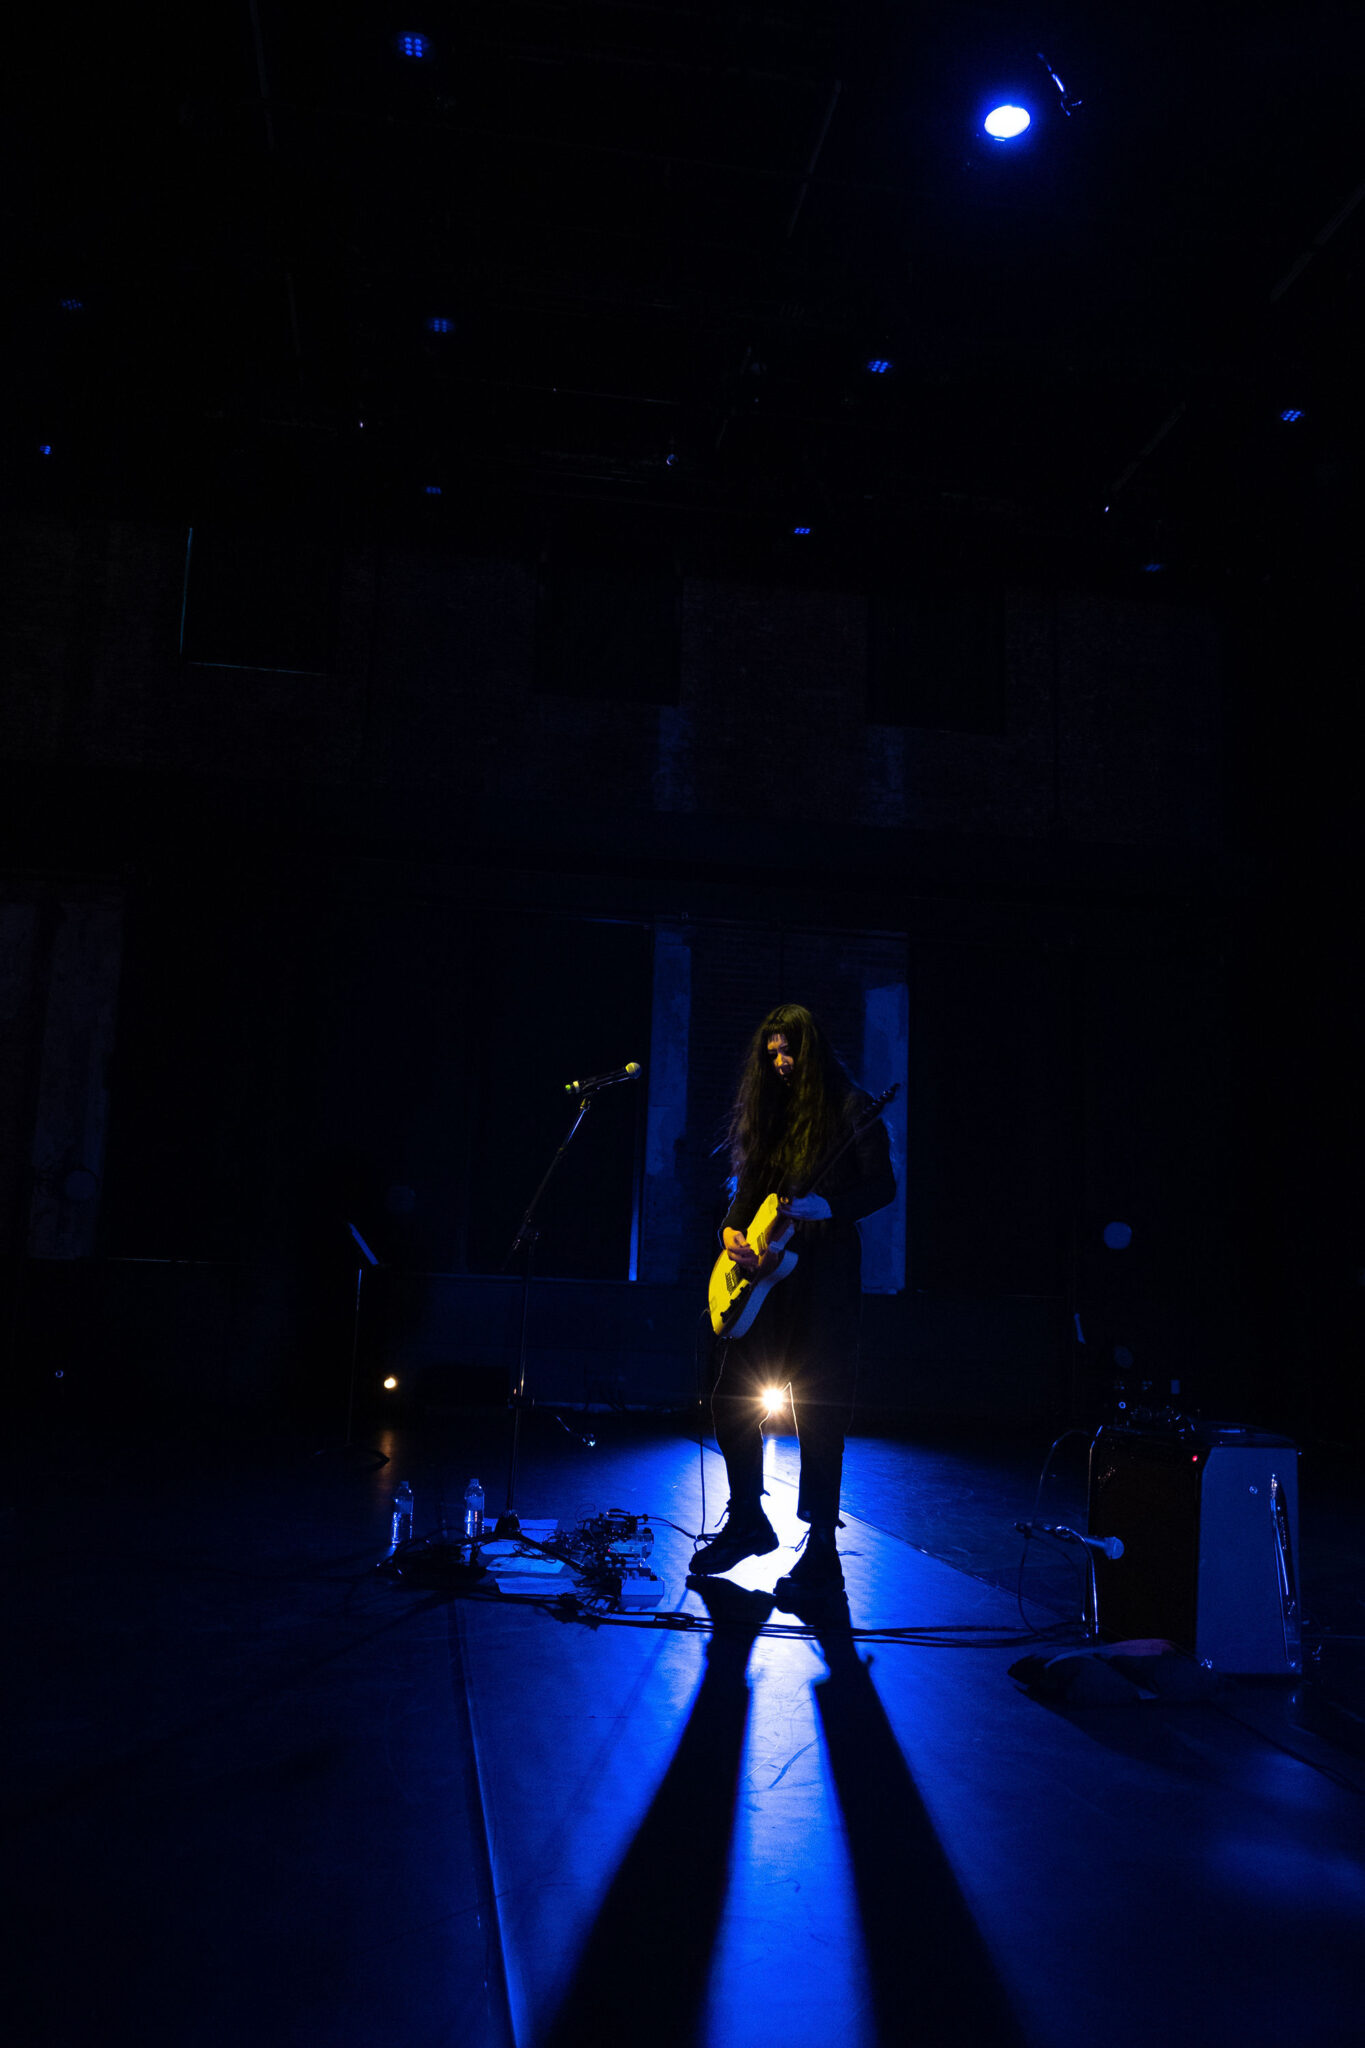 Johanna Hedva standing on a dark stage with a guitar, backlit in blue light, 